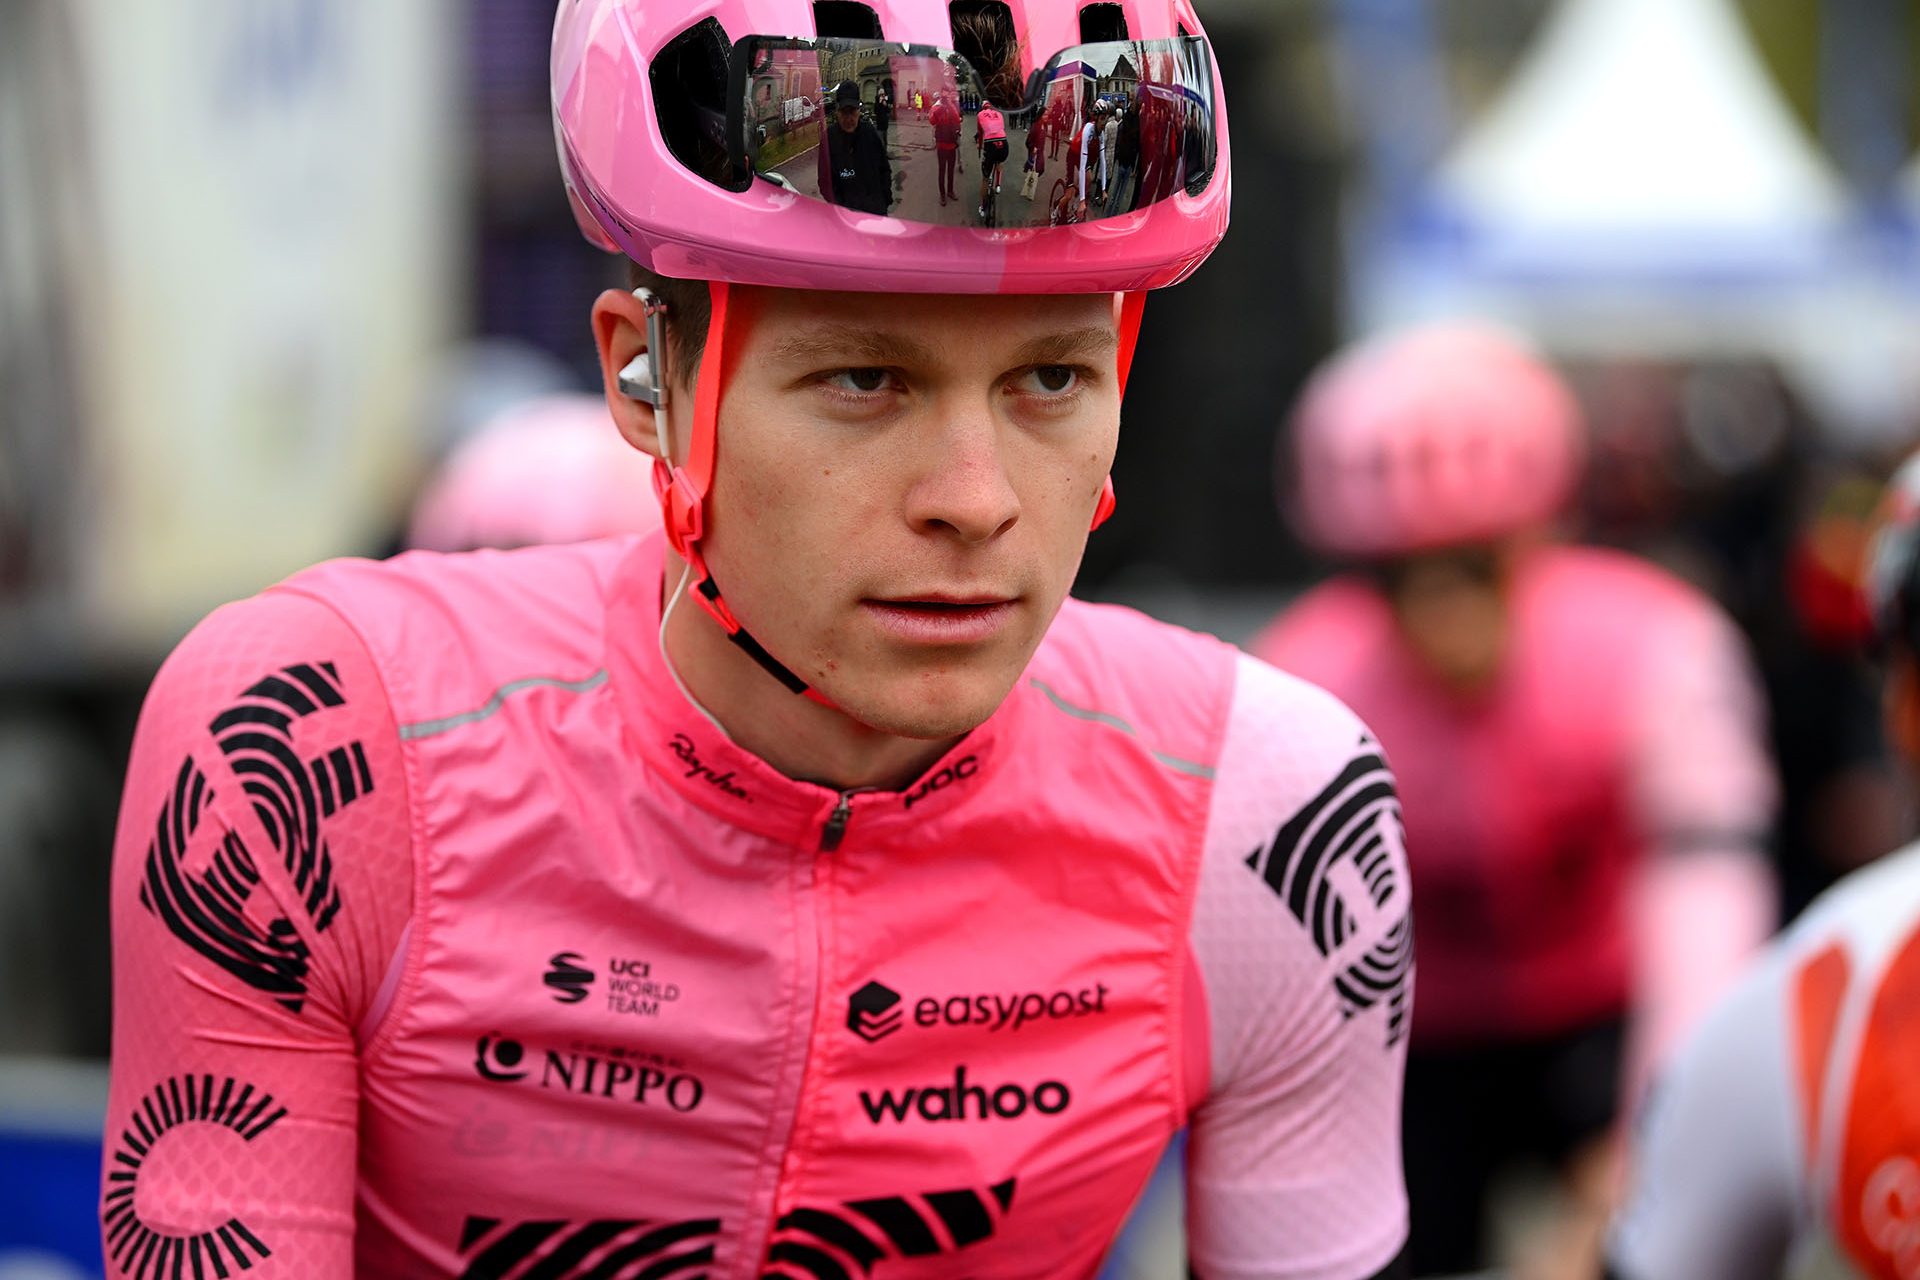 Can Georg Steinhauser live up to uncle Jan Ullrich's cycling legacy?